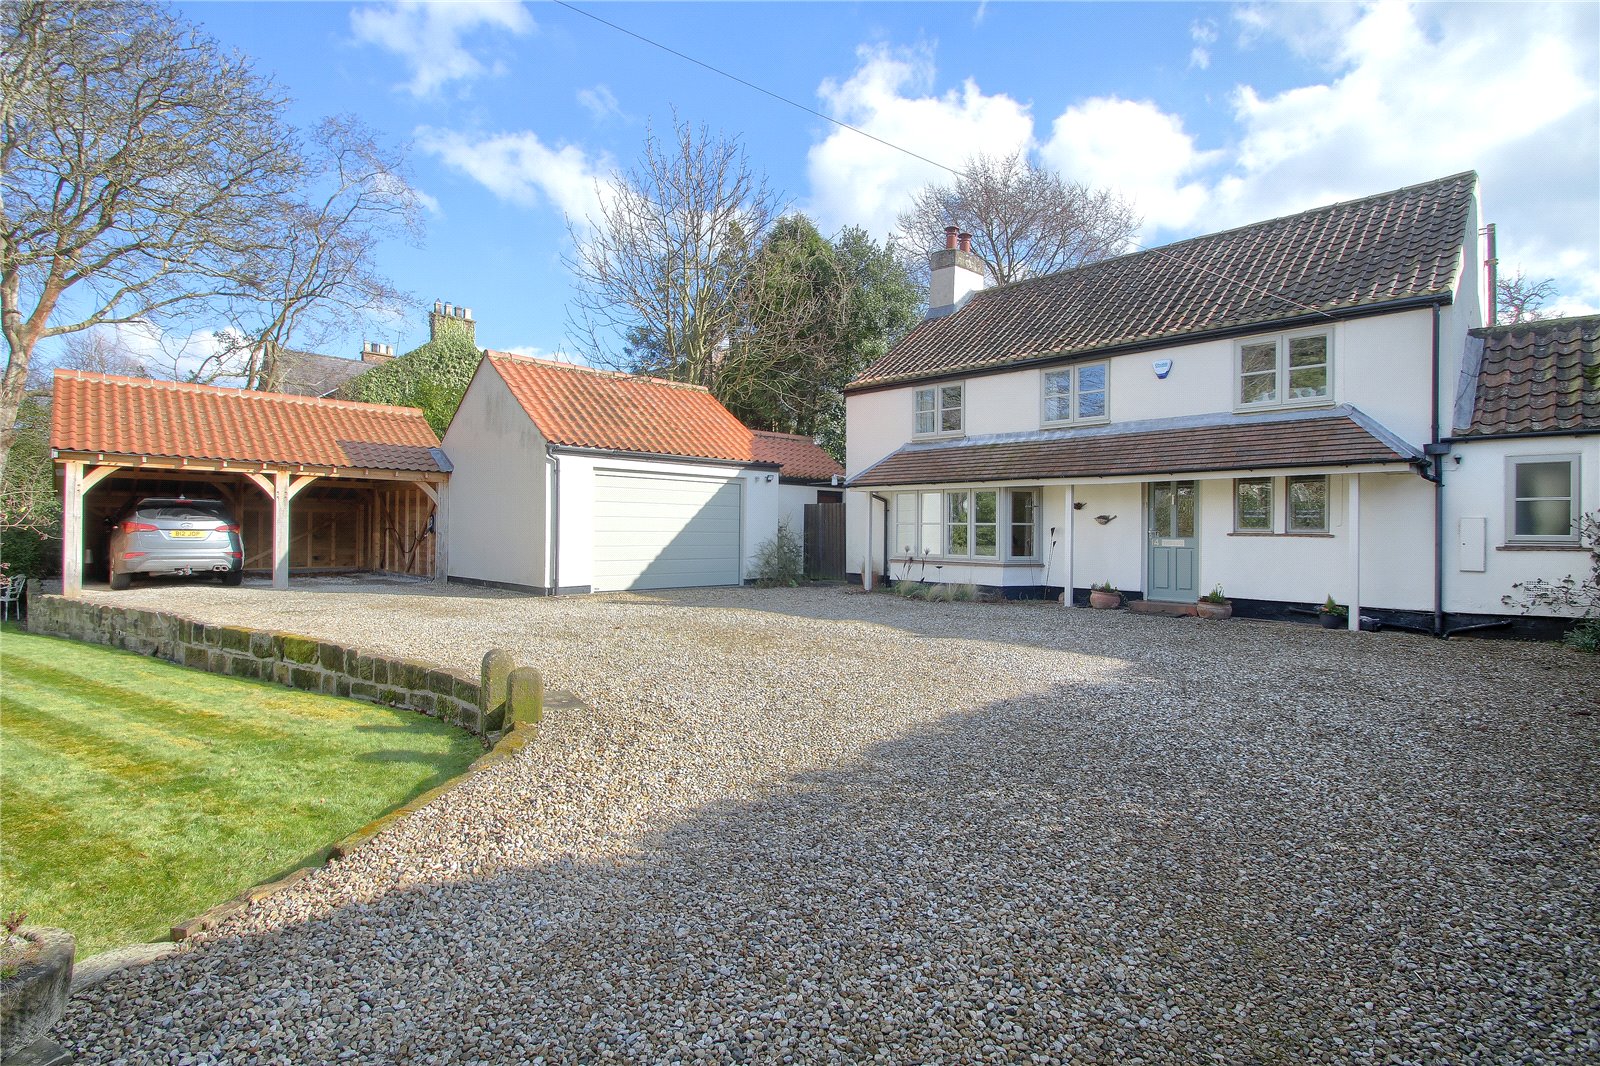 4 bed house for sale in Enterpen, Hutton Rudby 1